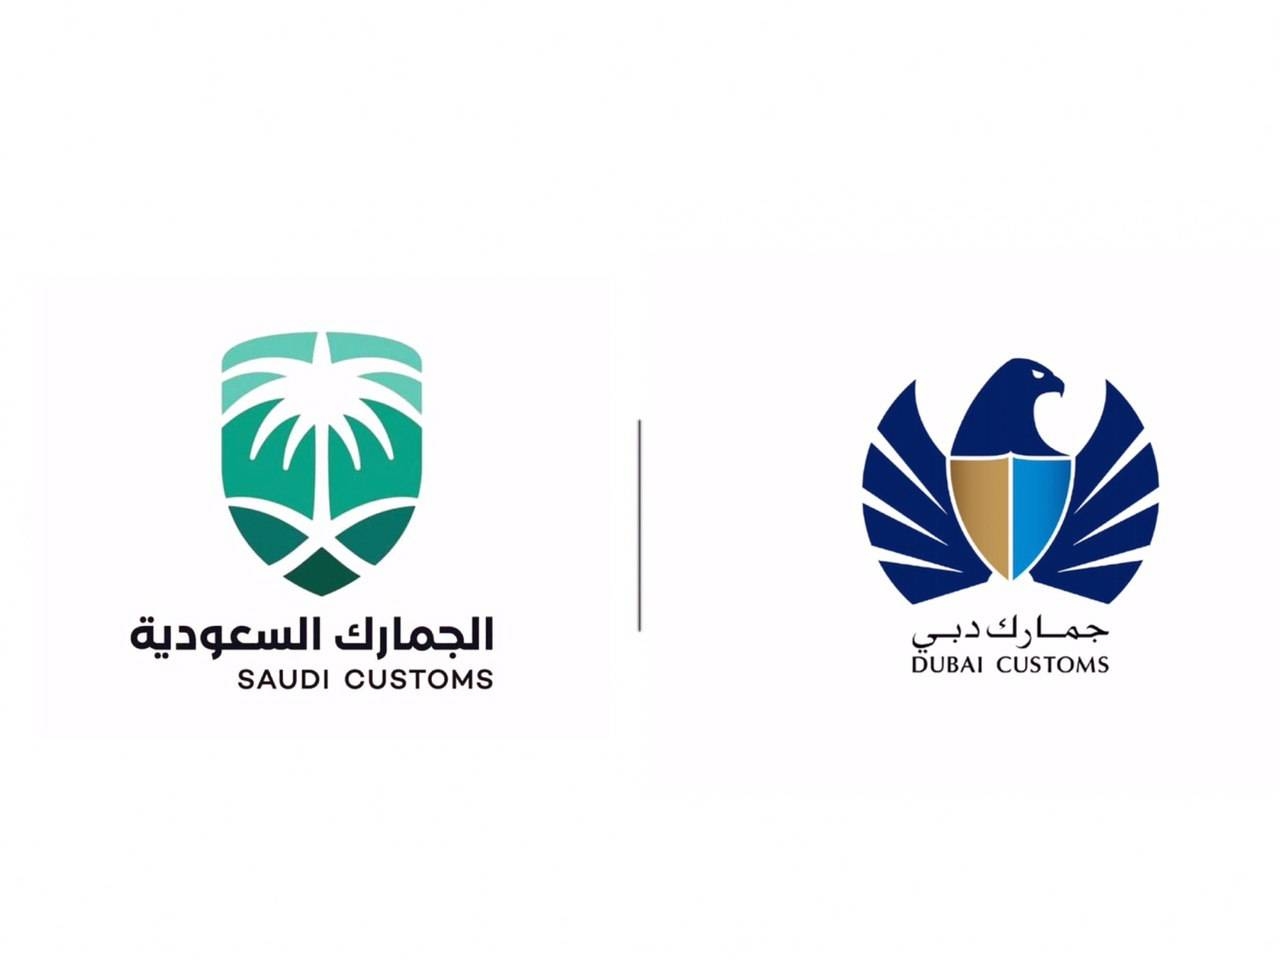 Mutual trade between the Kingdom and Dubai reached SR12 billion in Q1, 2020, with imports contributing approximately SR2.4 billion, exports nearly SR640 million, and re-exports SR9 billion. — Courtesy WAM
